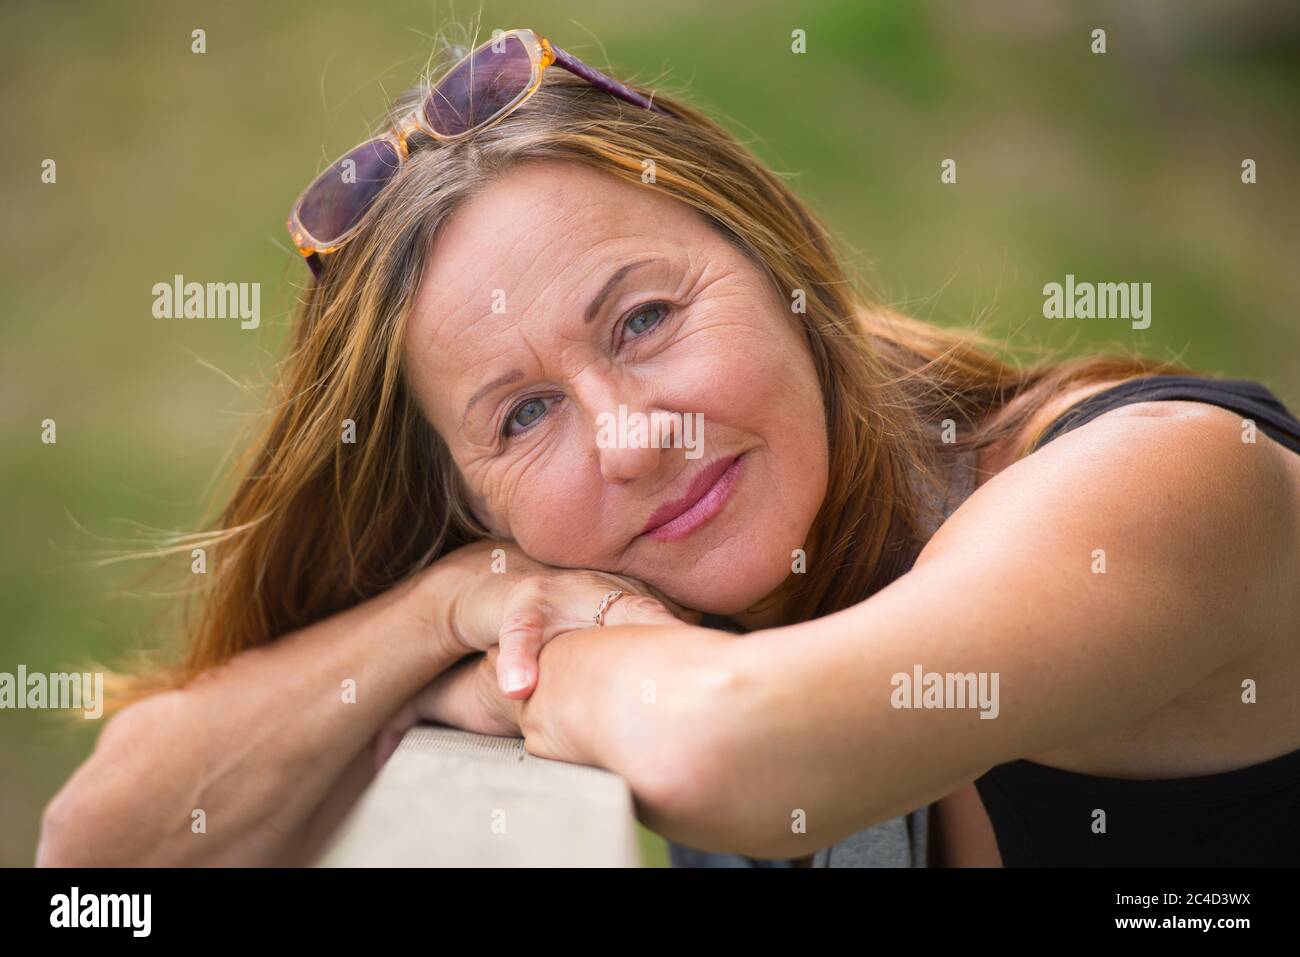 Portrait attractive mature woman relaxed and happy smiling outdoor with sunglasses, green blurred background and copy space. Stock Photo